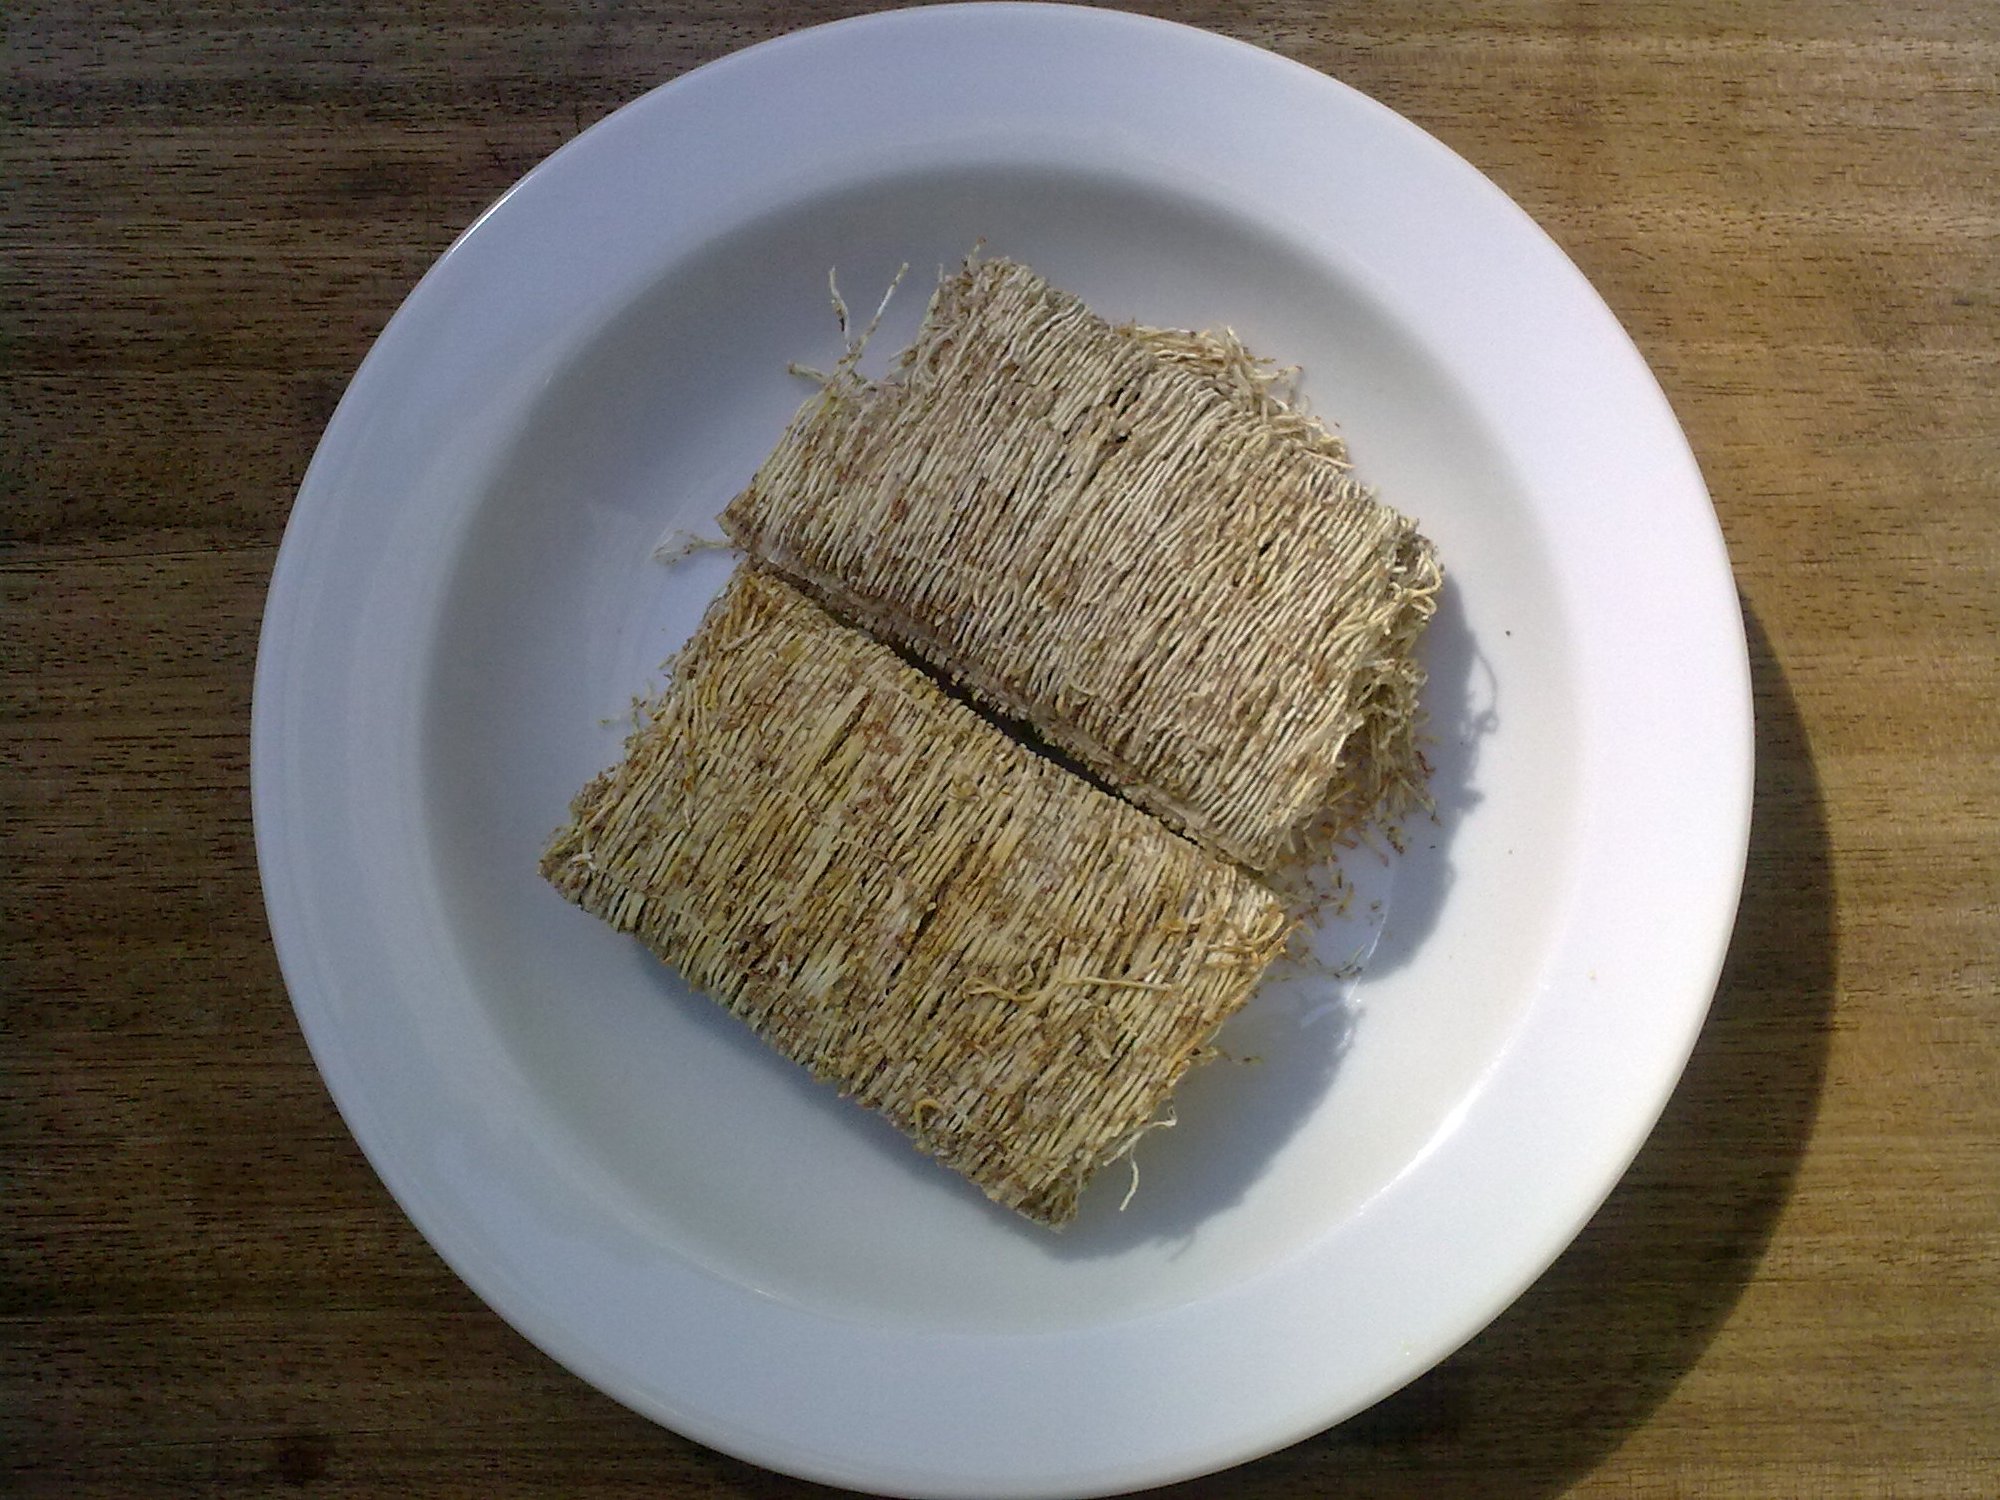 who invented shredded wheat cereal and how is shredded wheat mini wheats made